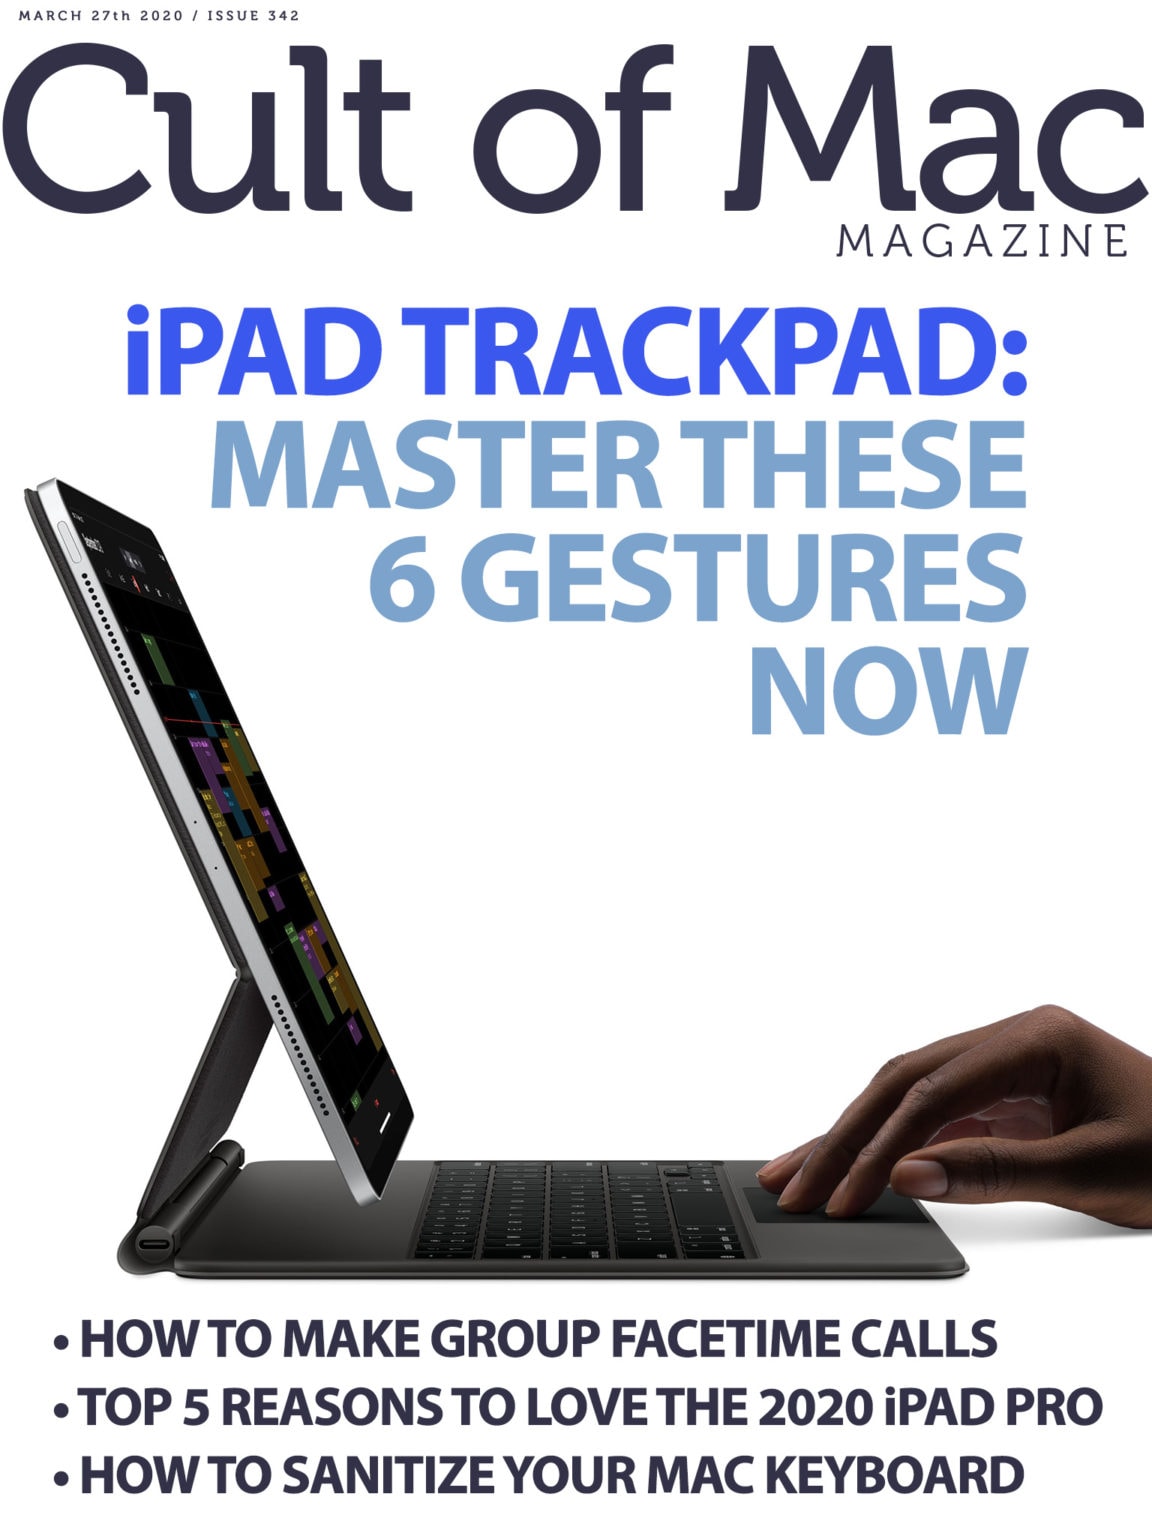 Master these 6 iPad trackpad gestures now.